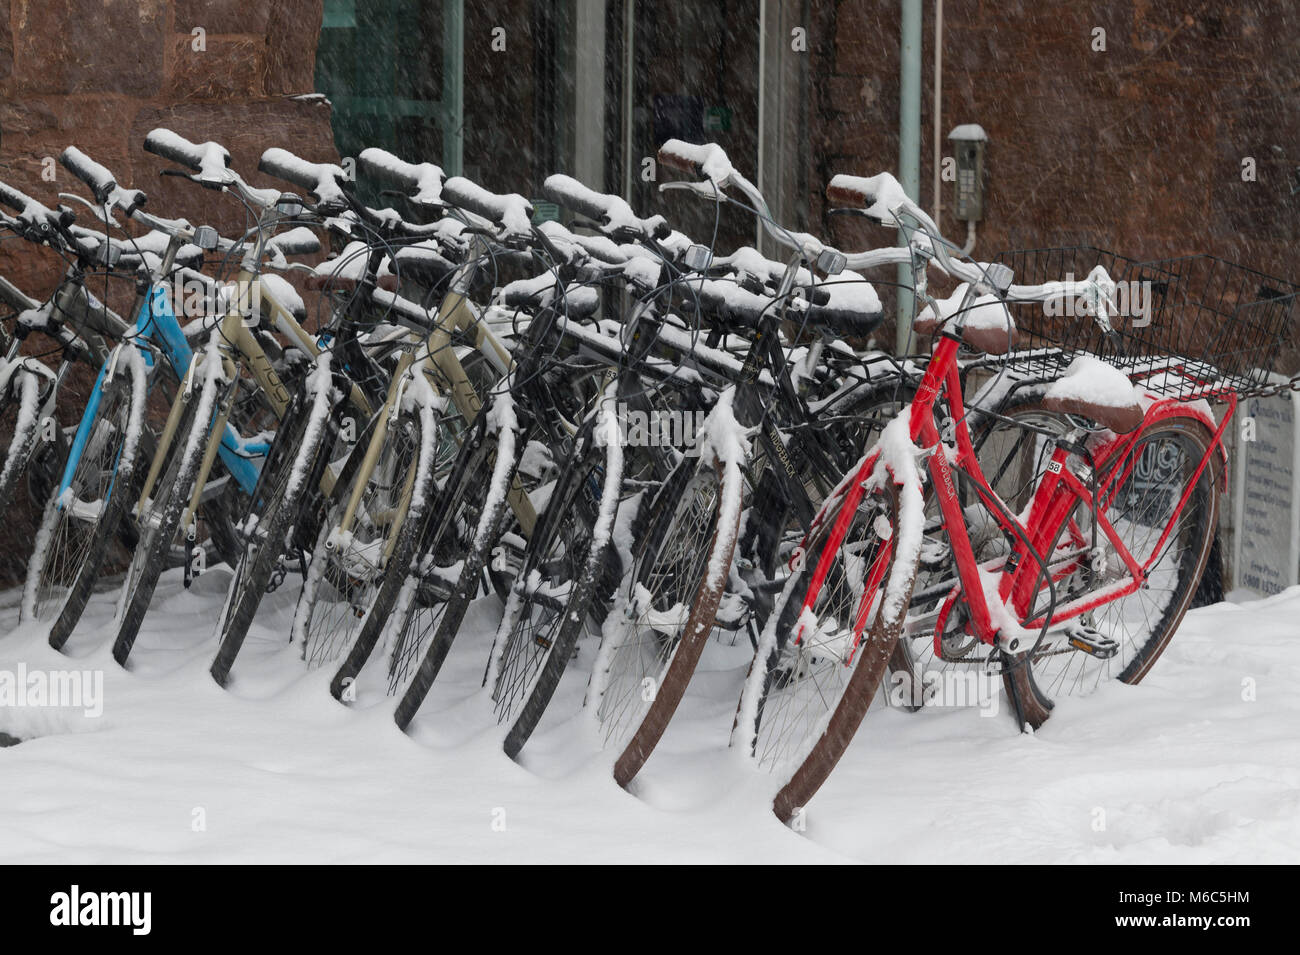 Exeter, Devon, UK. March 1st 2018. The Beast from the East meets Storm Emma in Exeter as a red weather warning is issued. Bikes become covered in snow Stock Photo